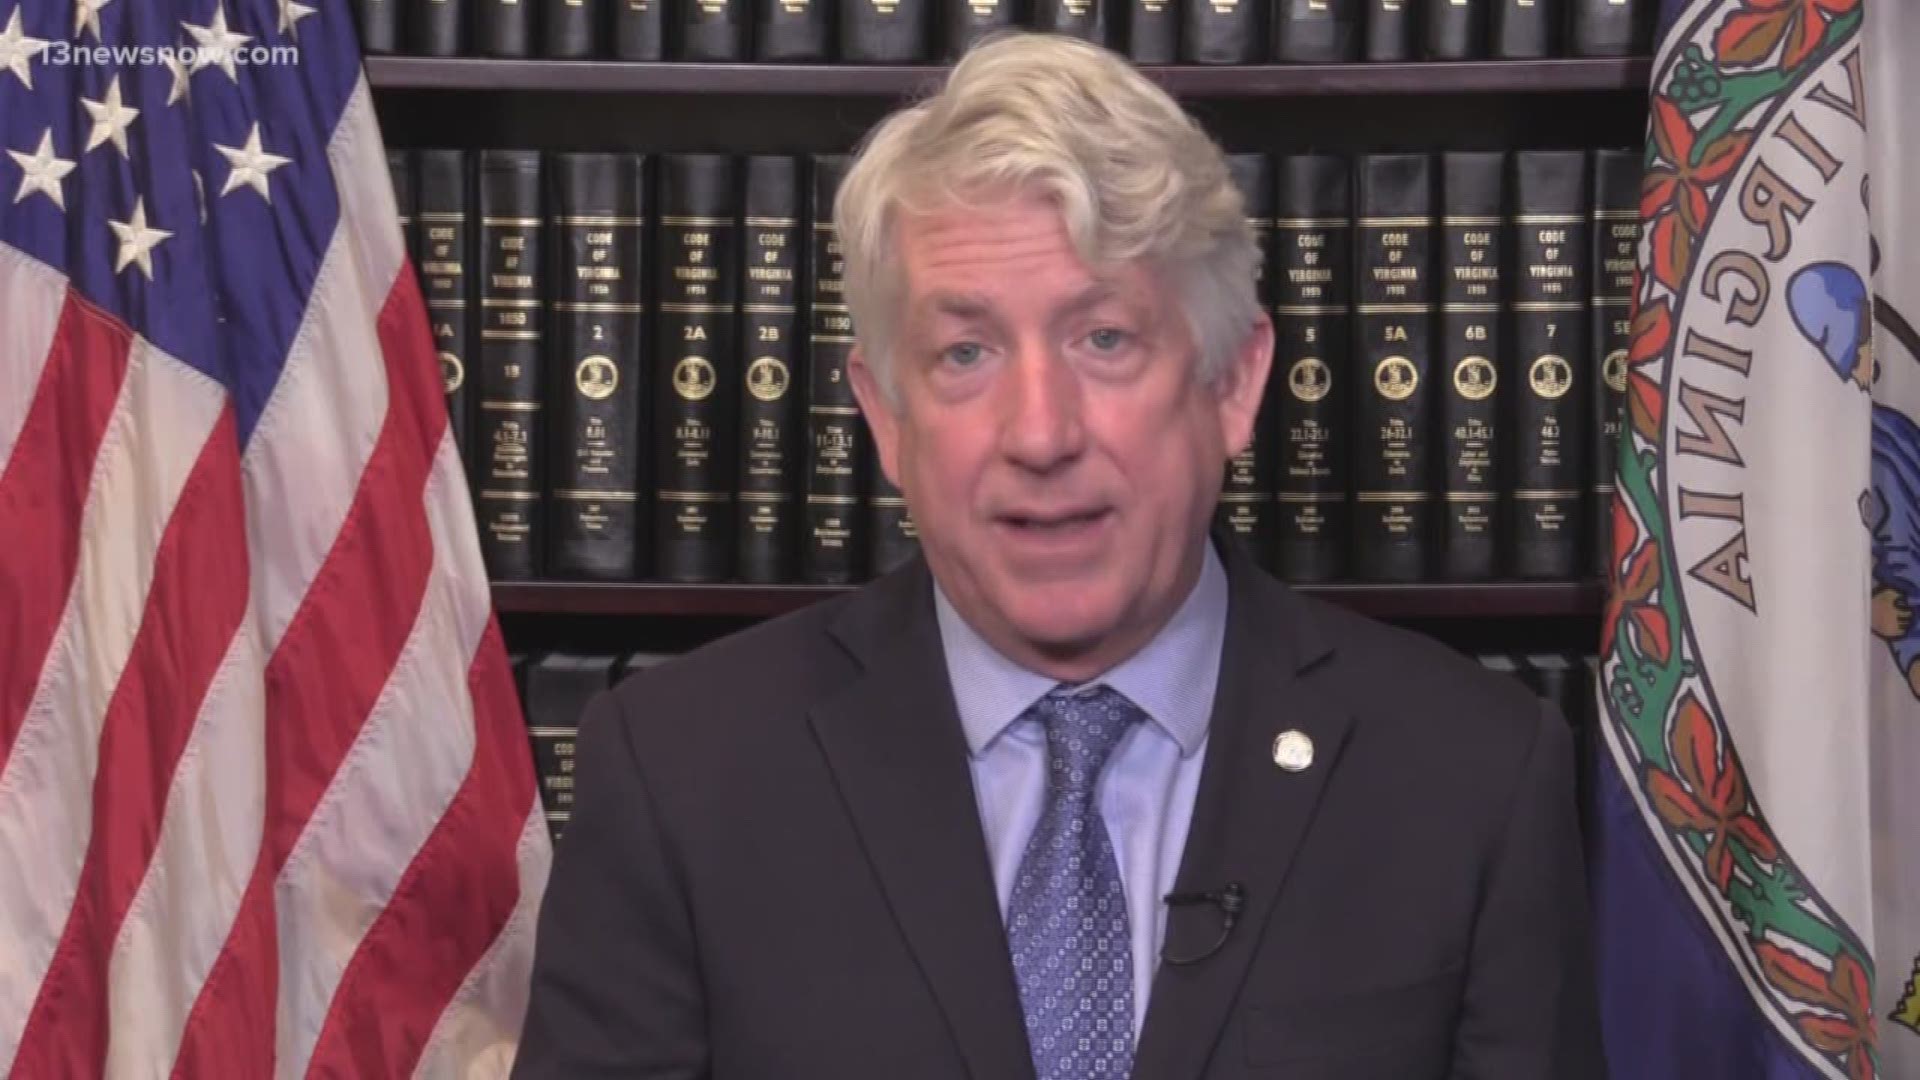 Attorney General Mark Herring has sent out more than 40 warning letters to businesses that might be price gouging supplies during the coronavirus pandemic.